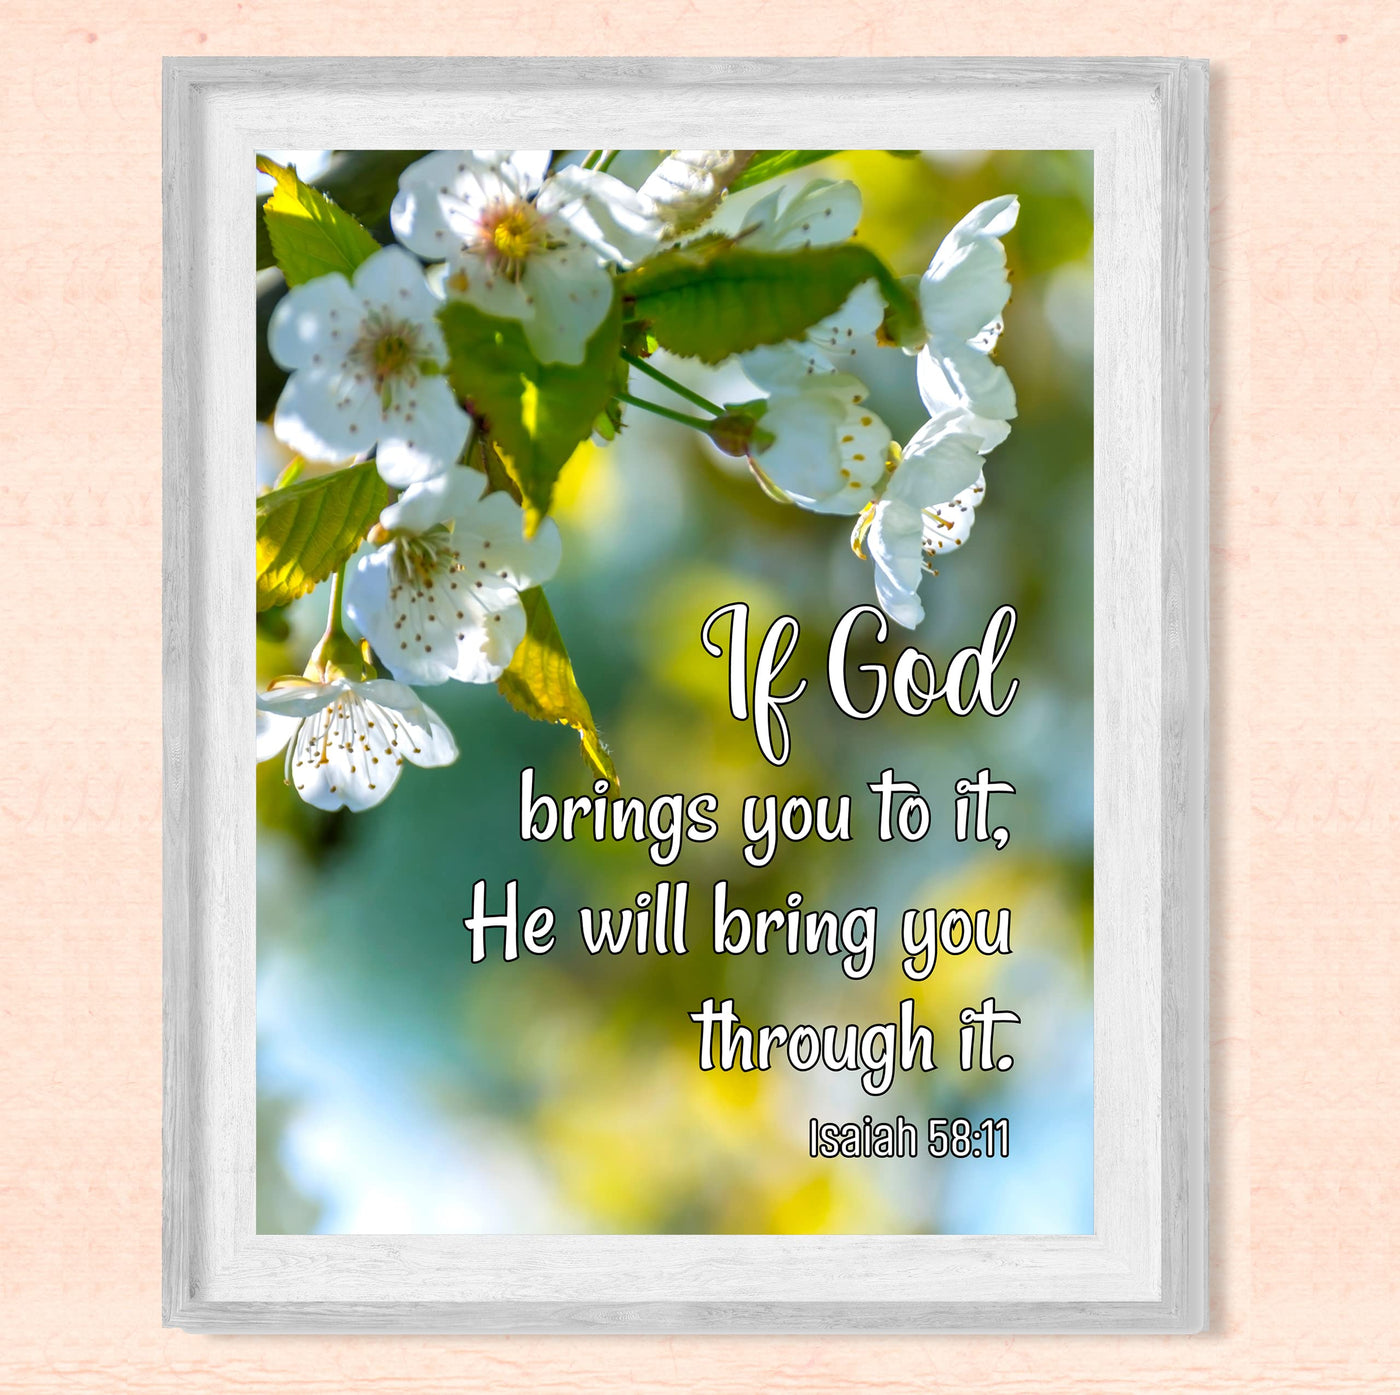 If God Brings You To It-He Will Bring You Through It-Isaiah 58:11- Bible Verse Wall Art -8 x 10"-Floral Scripture Wall Print -Ready to Frame. Inspirational Home-Office-Christian-Faith Decor!